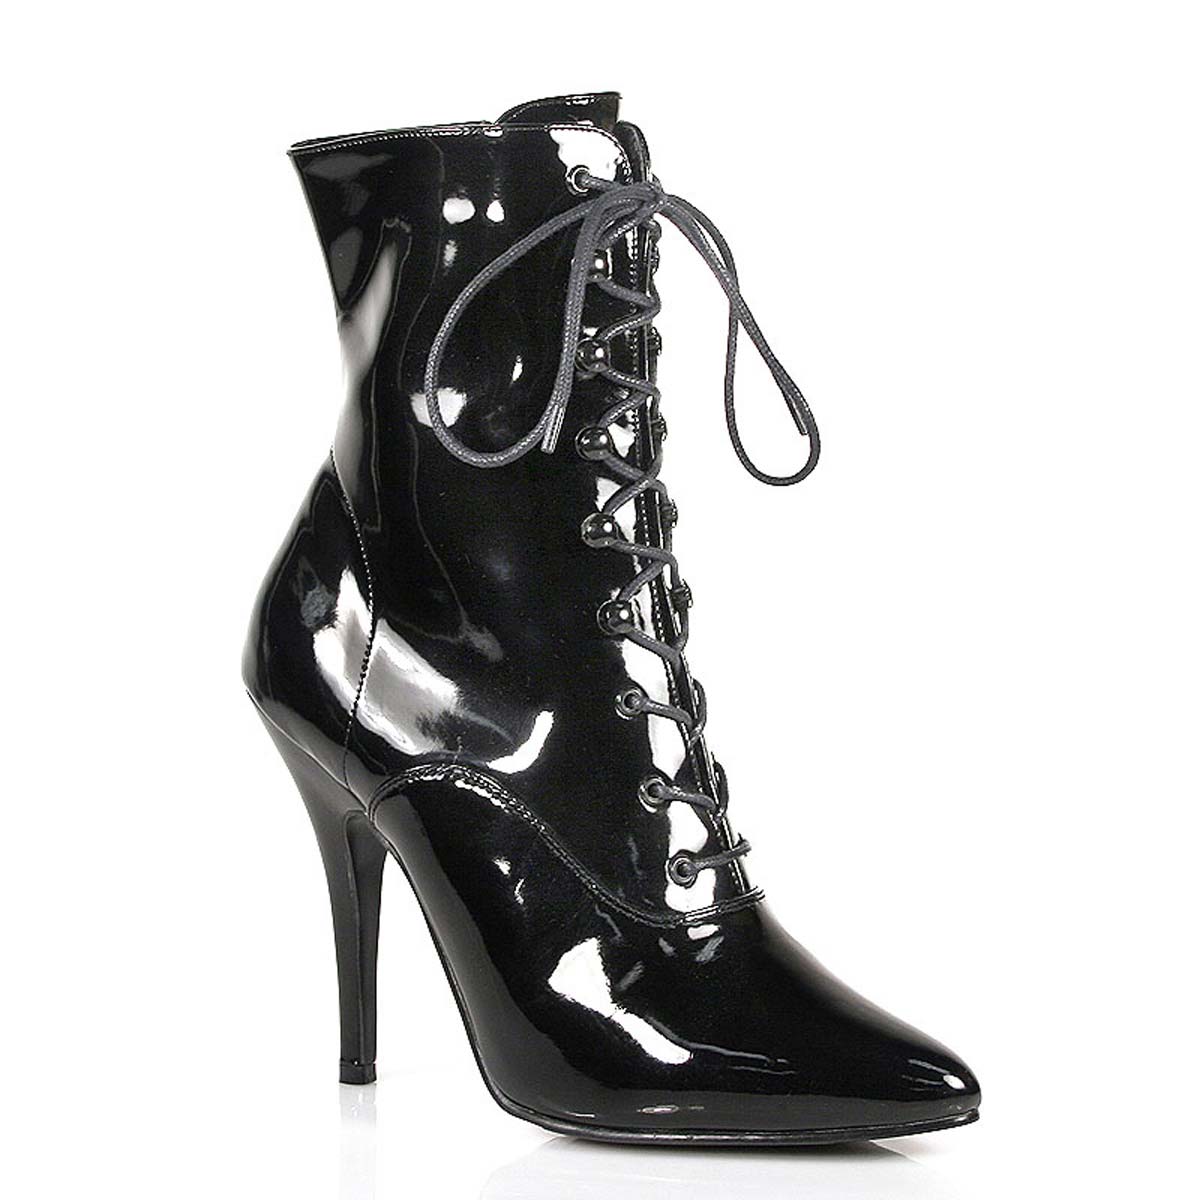 Pleaser Seduce-1020 - Black Patent in Sexy Boots - $73.95